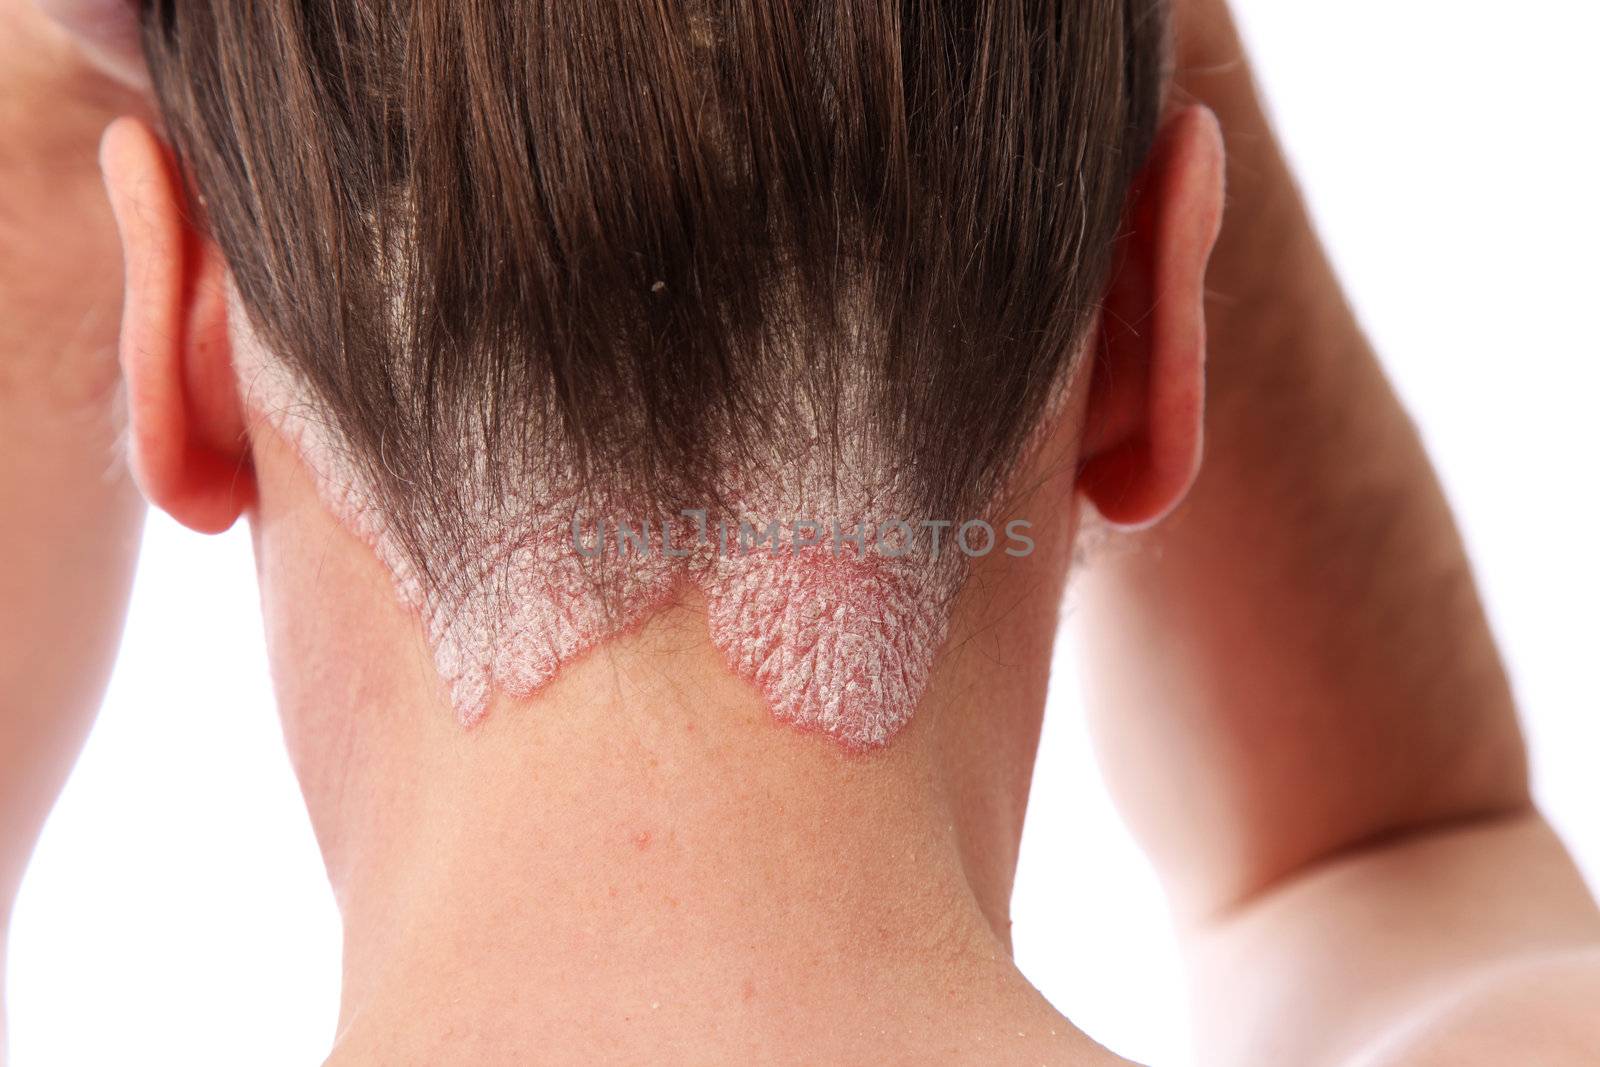 psoriasis on the hairline and on the scalp-close up